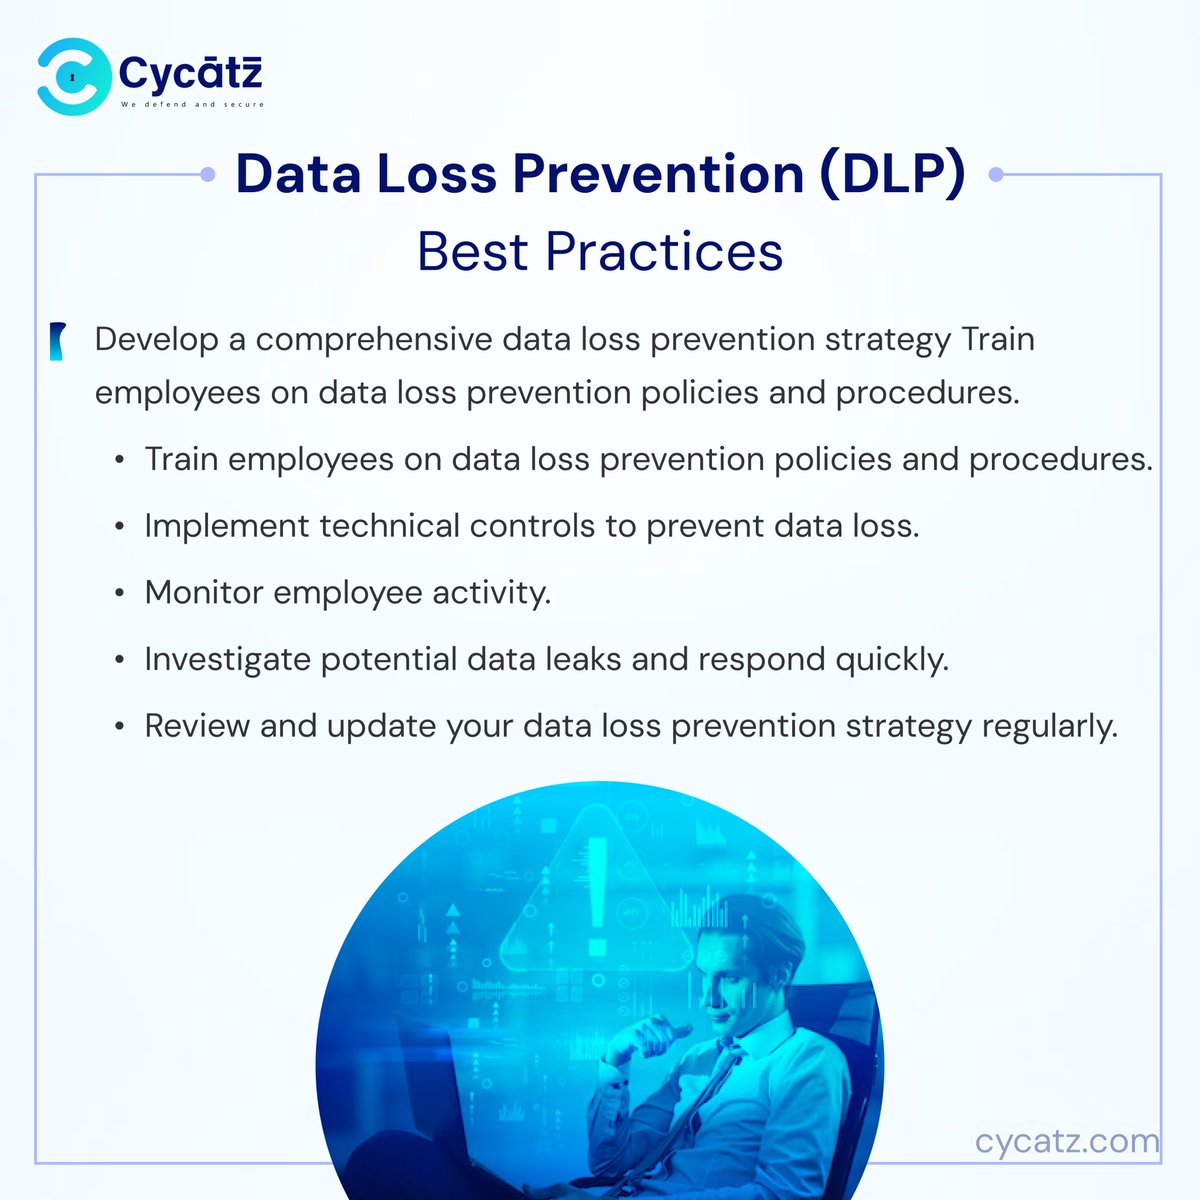 #CyCatz #Cybersecurity Data Loss Prevention(DLP) Best Practices
 
#cyberawareness #cyberattack #breaches #databreaches #cybercrime #darkwebmonitoring #SurfaceWebMonitoring #mobilesecurity #emailsecurity #vendorriskmanagement #BrandMonitoring #security #dlp #practices